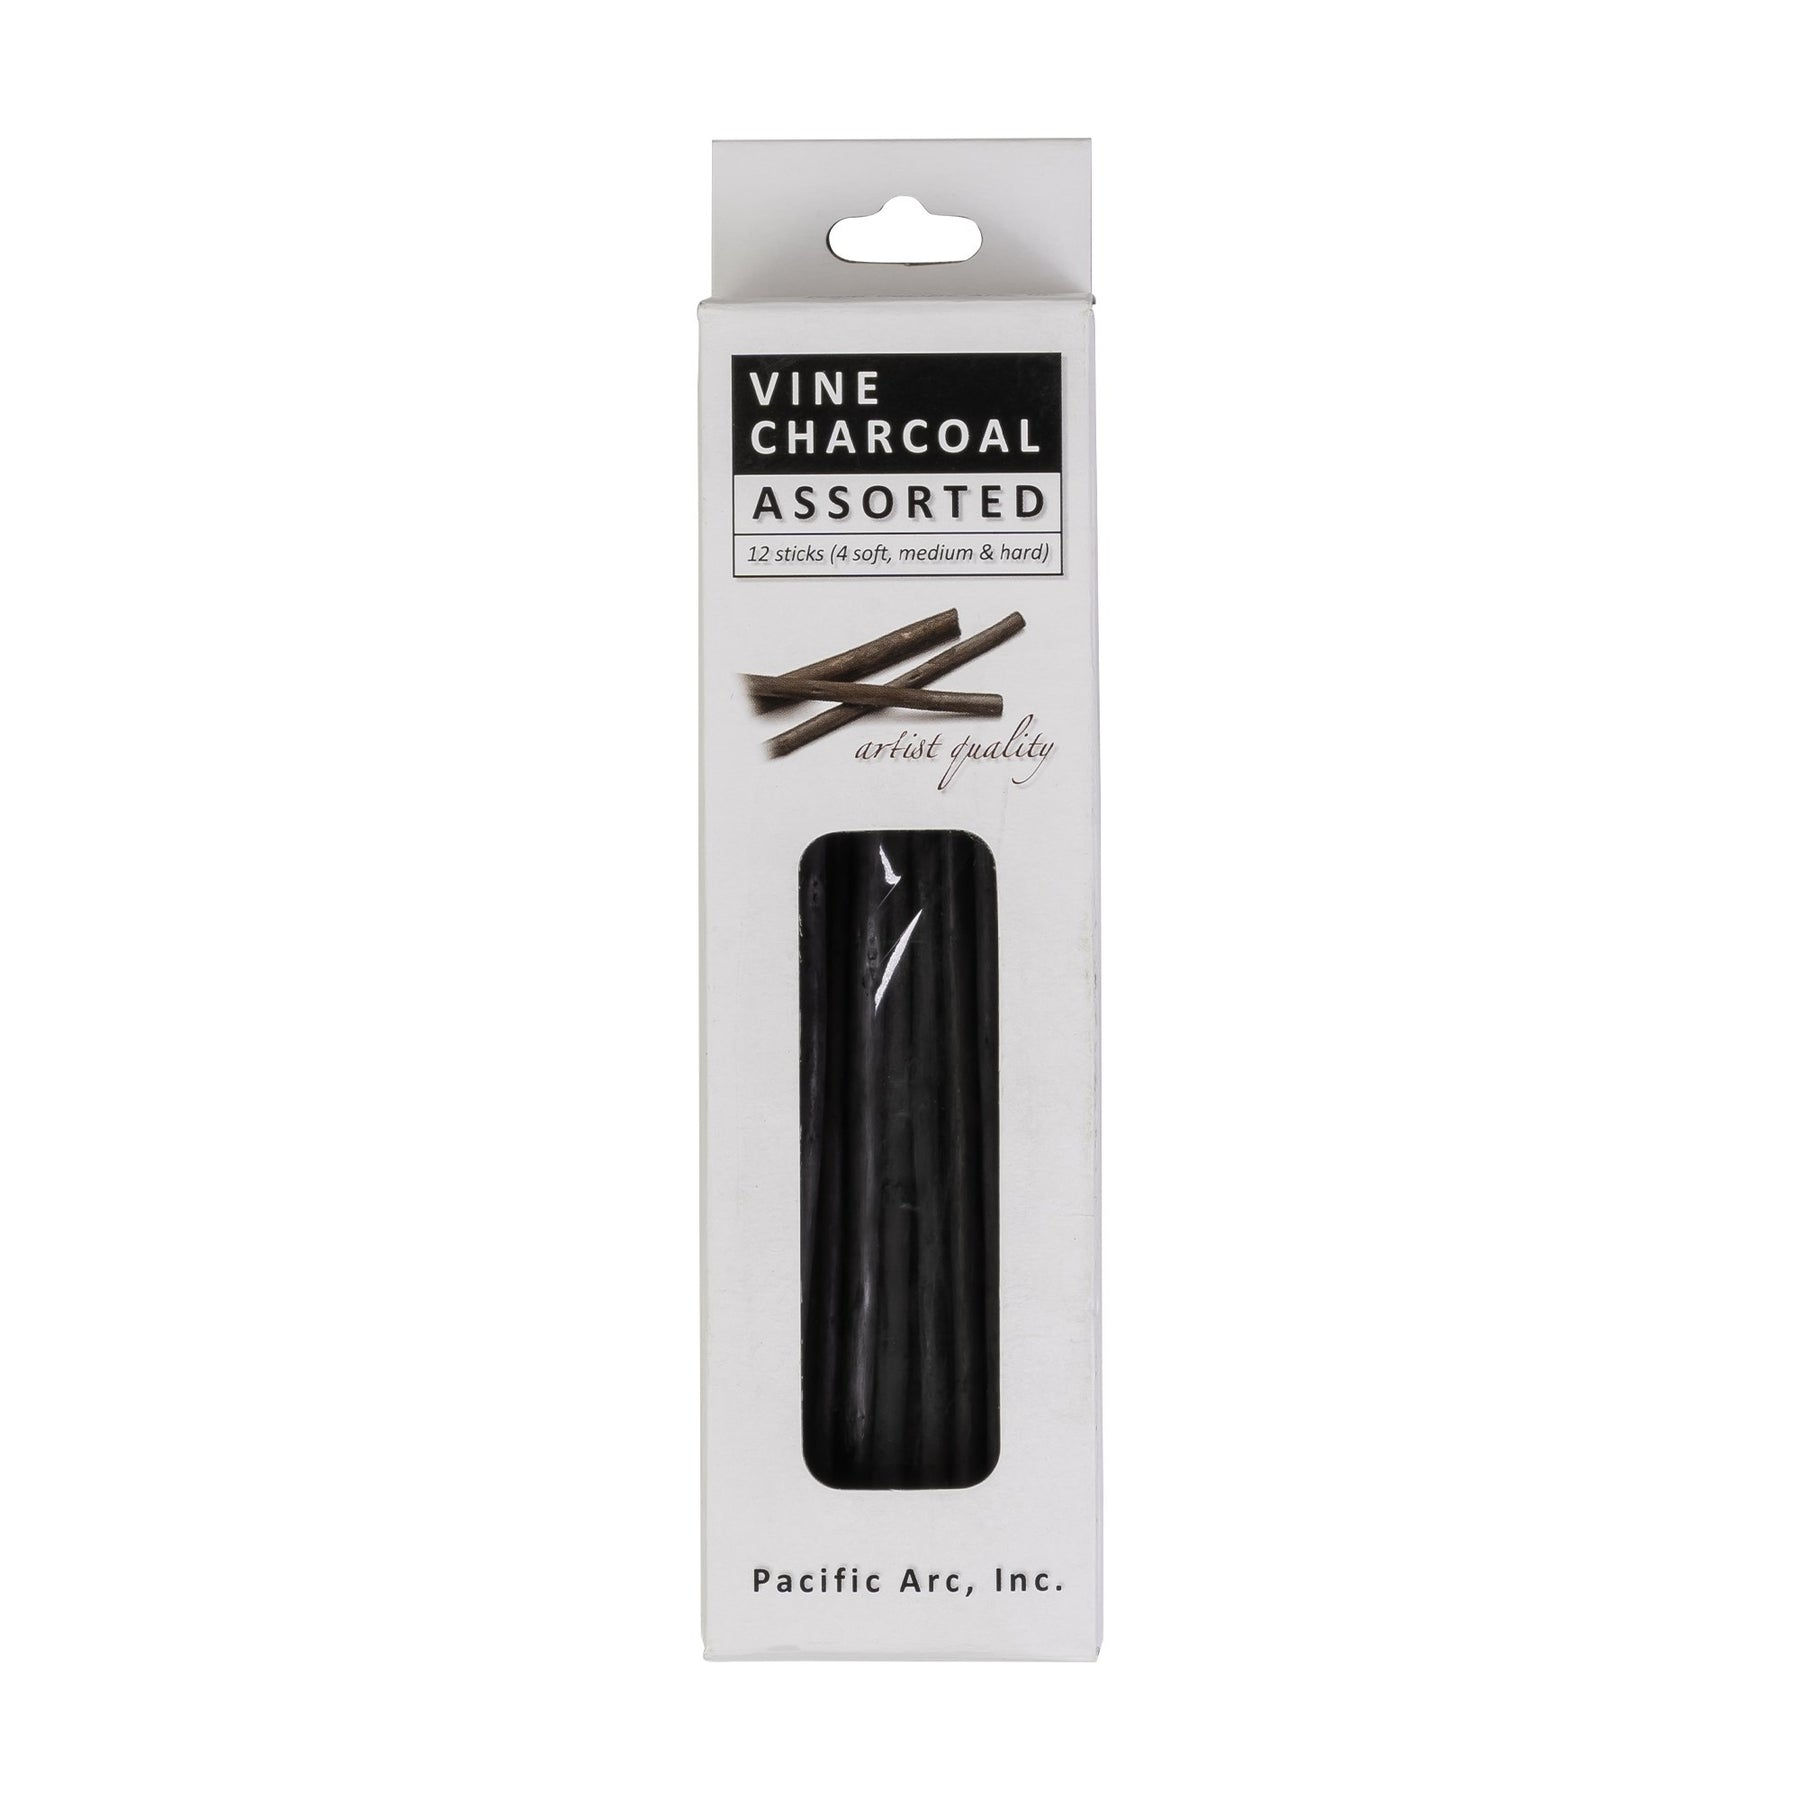 Artist Compressed Charcoal Stick Assorted Soft Medium Hard Artist Charcoal  Medium for Drawing Sketching Shading, Art Supplies Sketch Kits Tools Pack